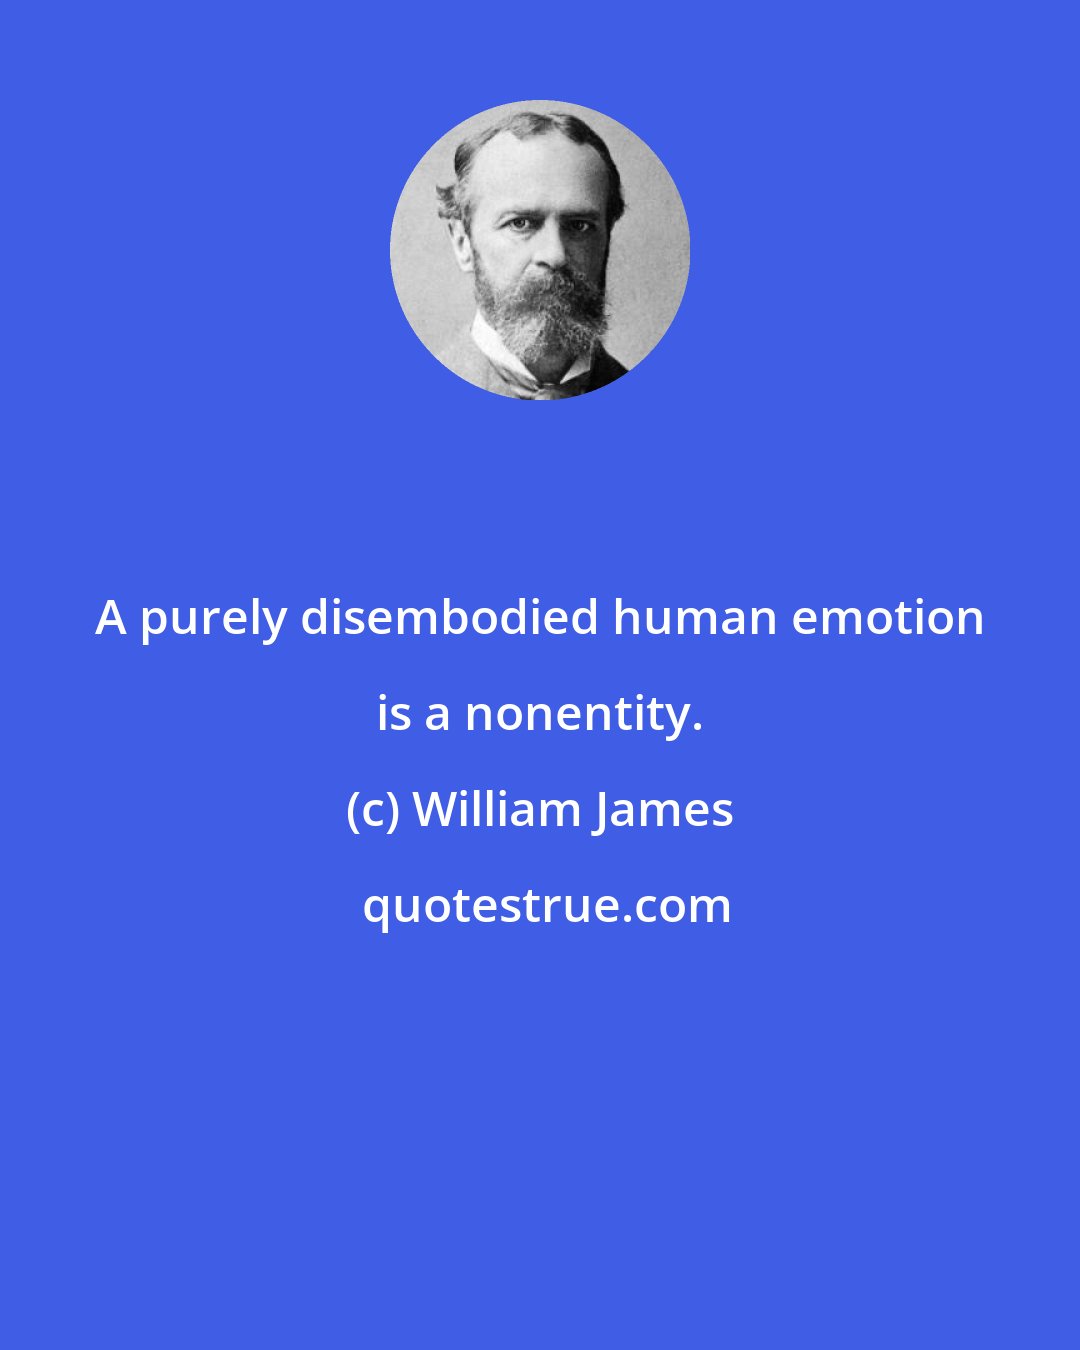 William James: A purely disembodied human emotion is a nonentity.